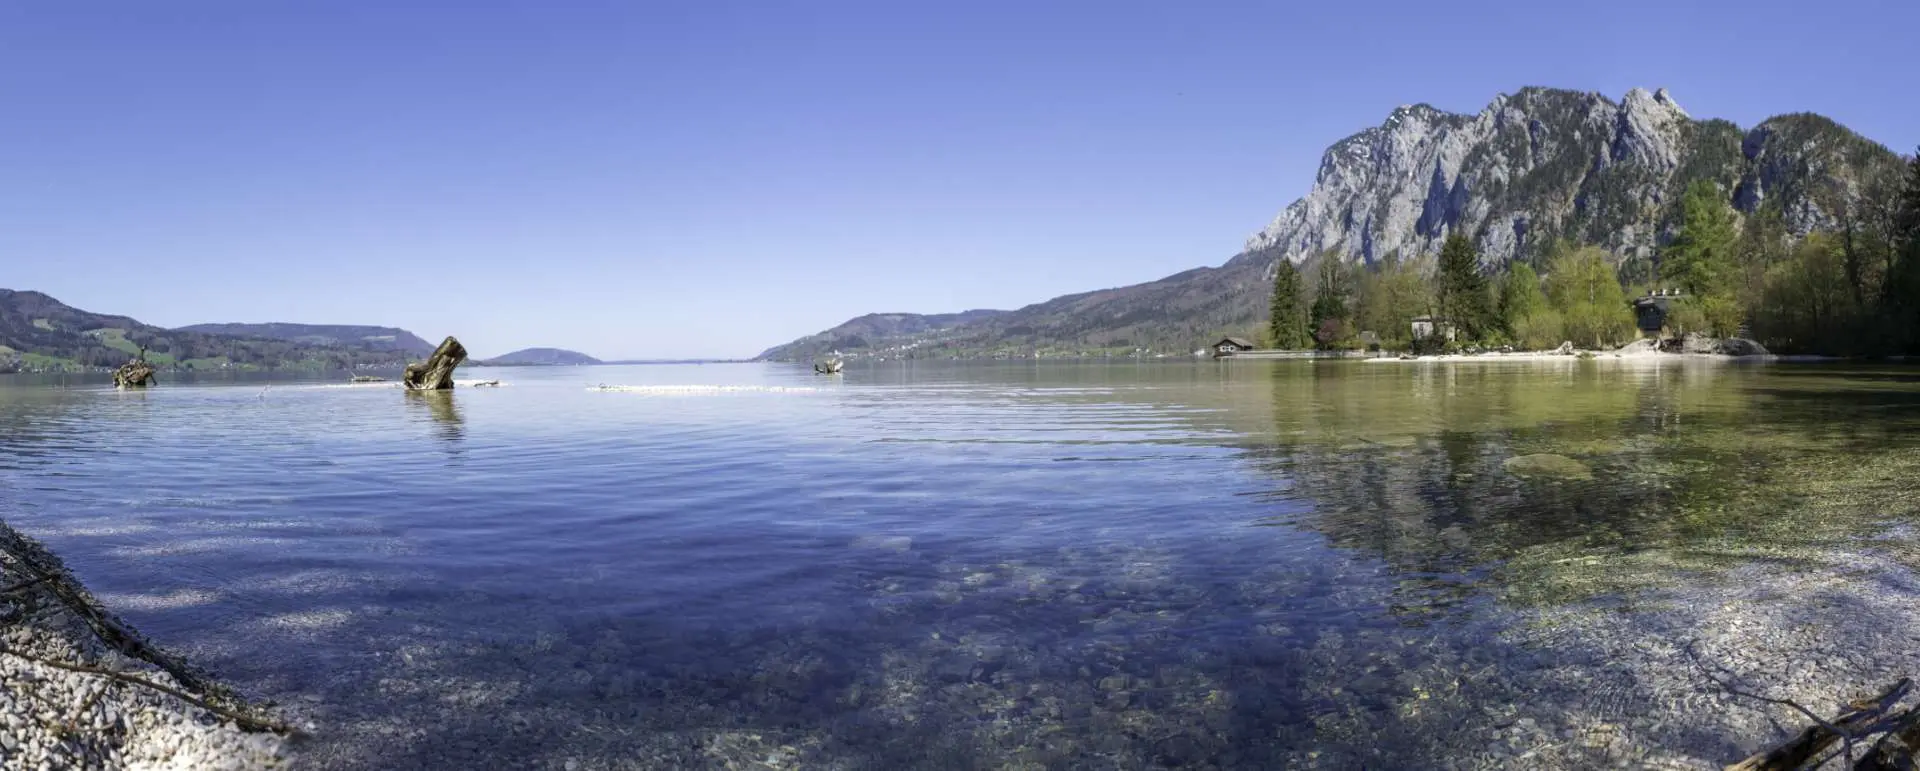 Attersee - the destination for hotels with multi-bed rooms